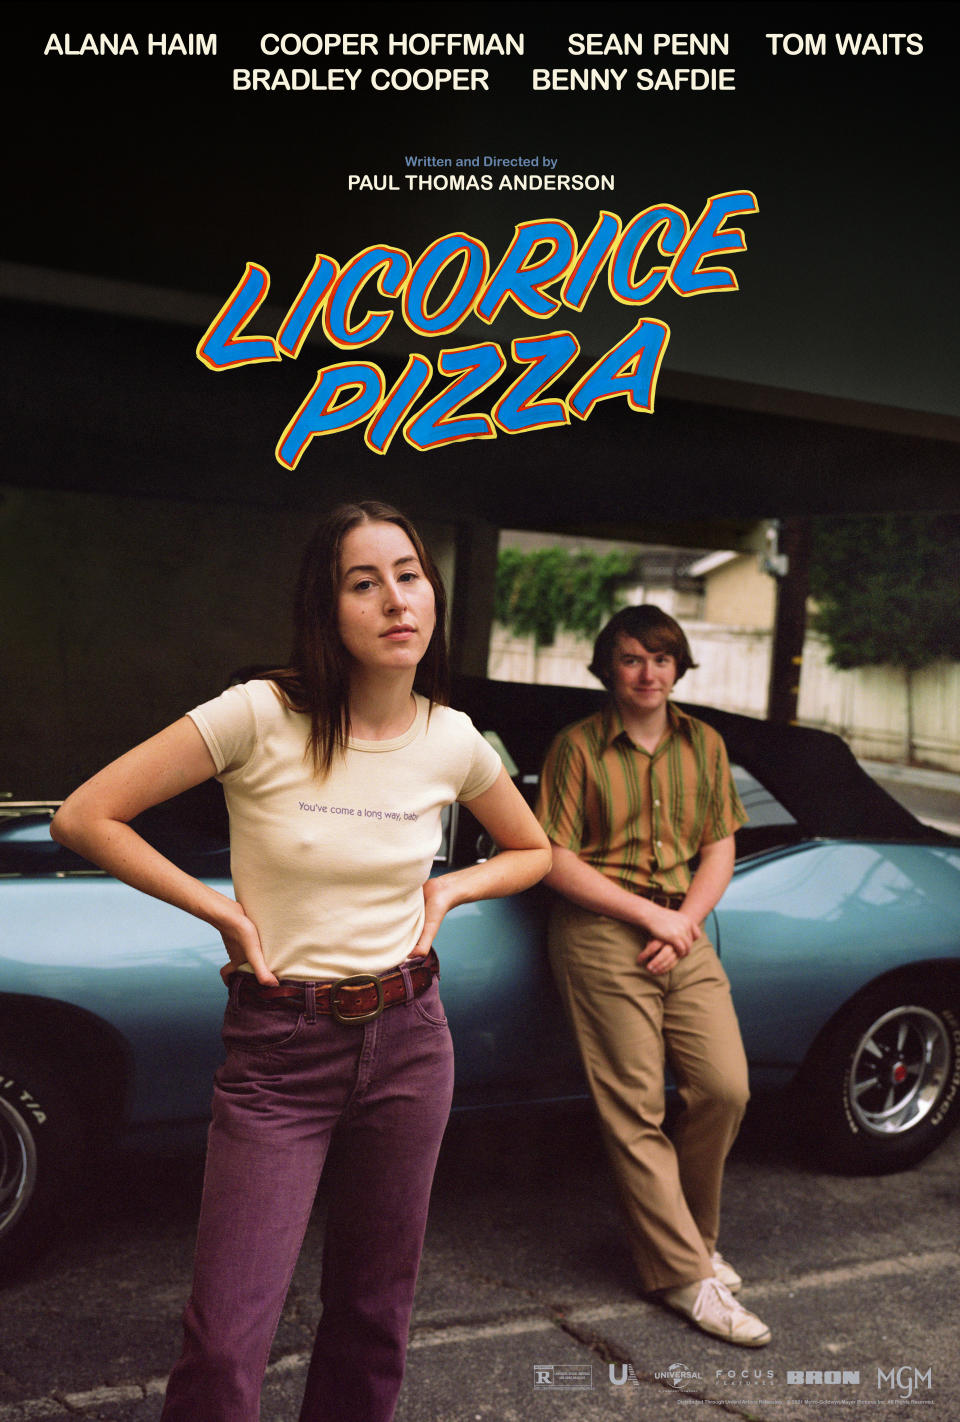 Alana Haim and Cooper Hoffman in “Licorice Pizza.”